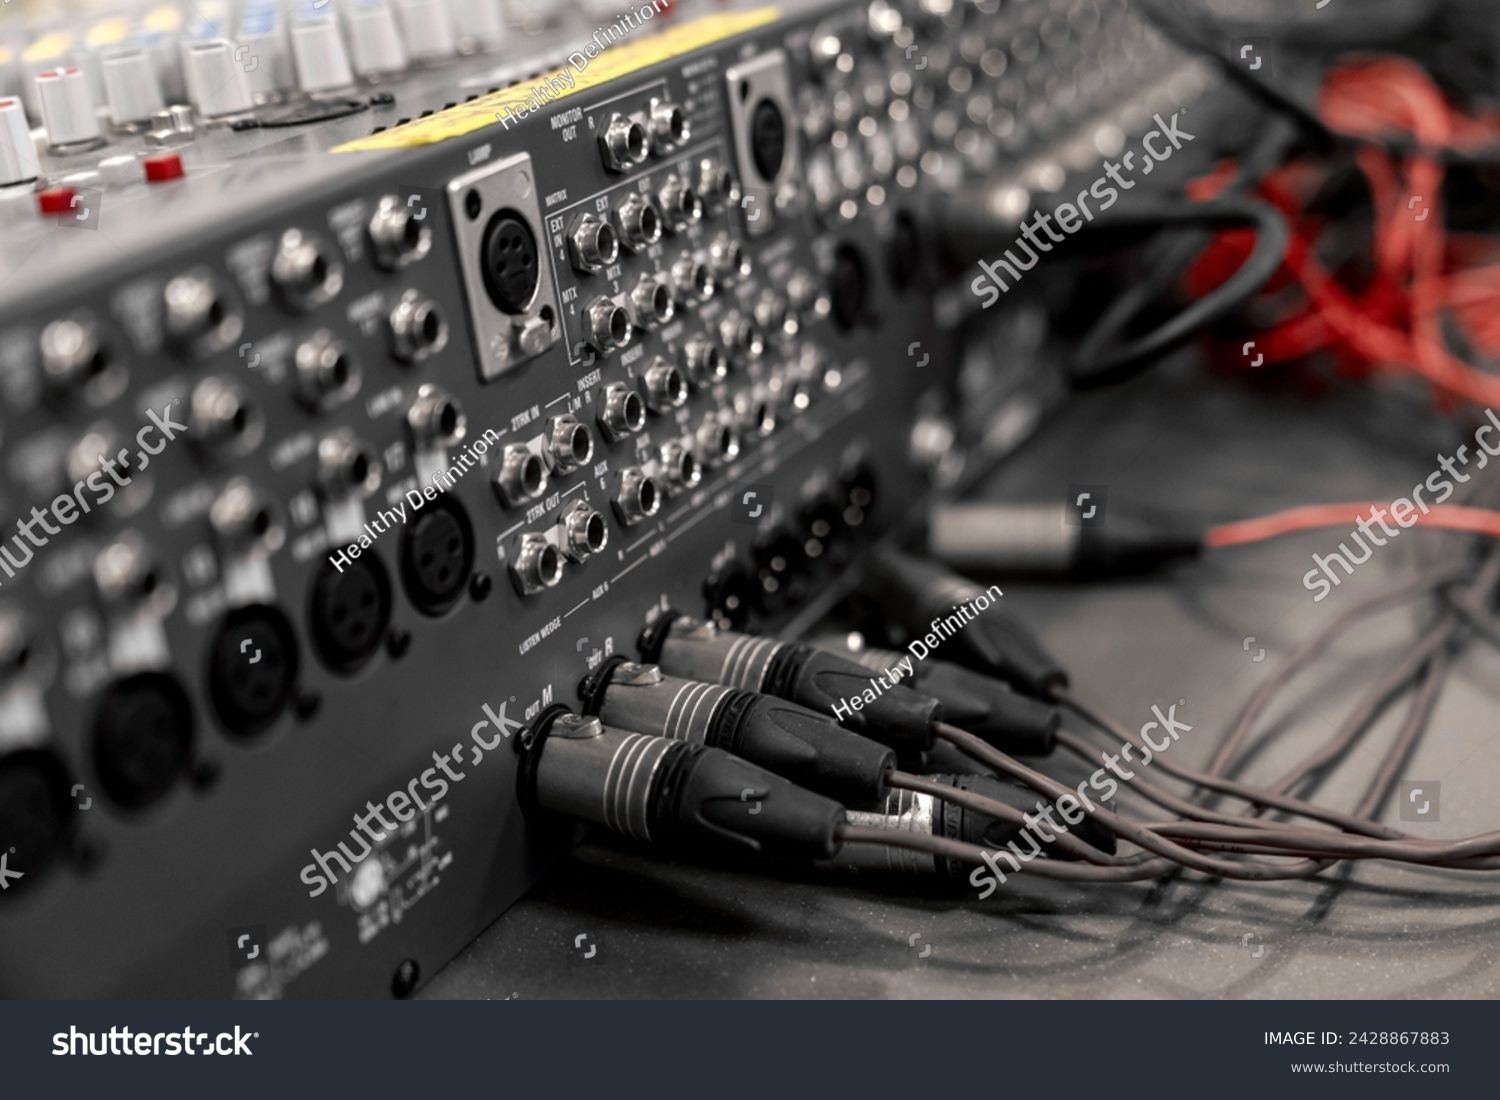 Mixer control. Music engineer. Backstage controls on an audio mixer, Sound mixer. Professional audio mixing console with lights, buttons, faders and sliders. sound check for concert. #2428867883